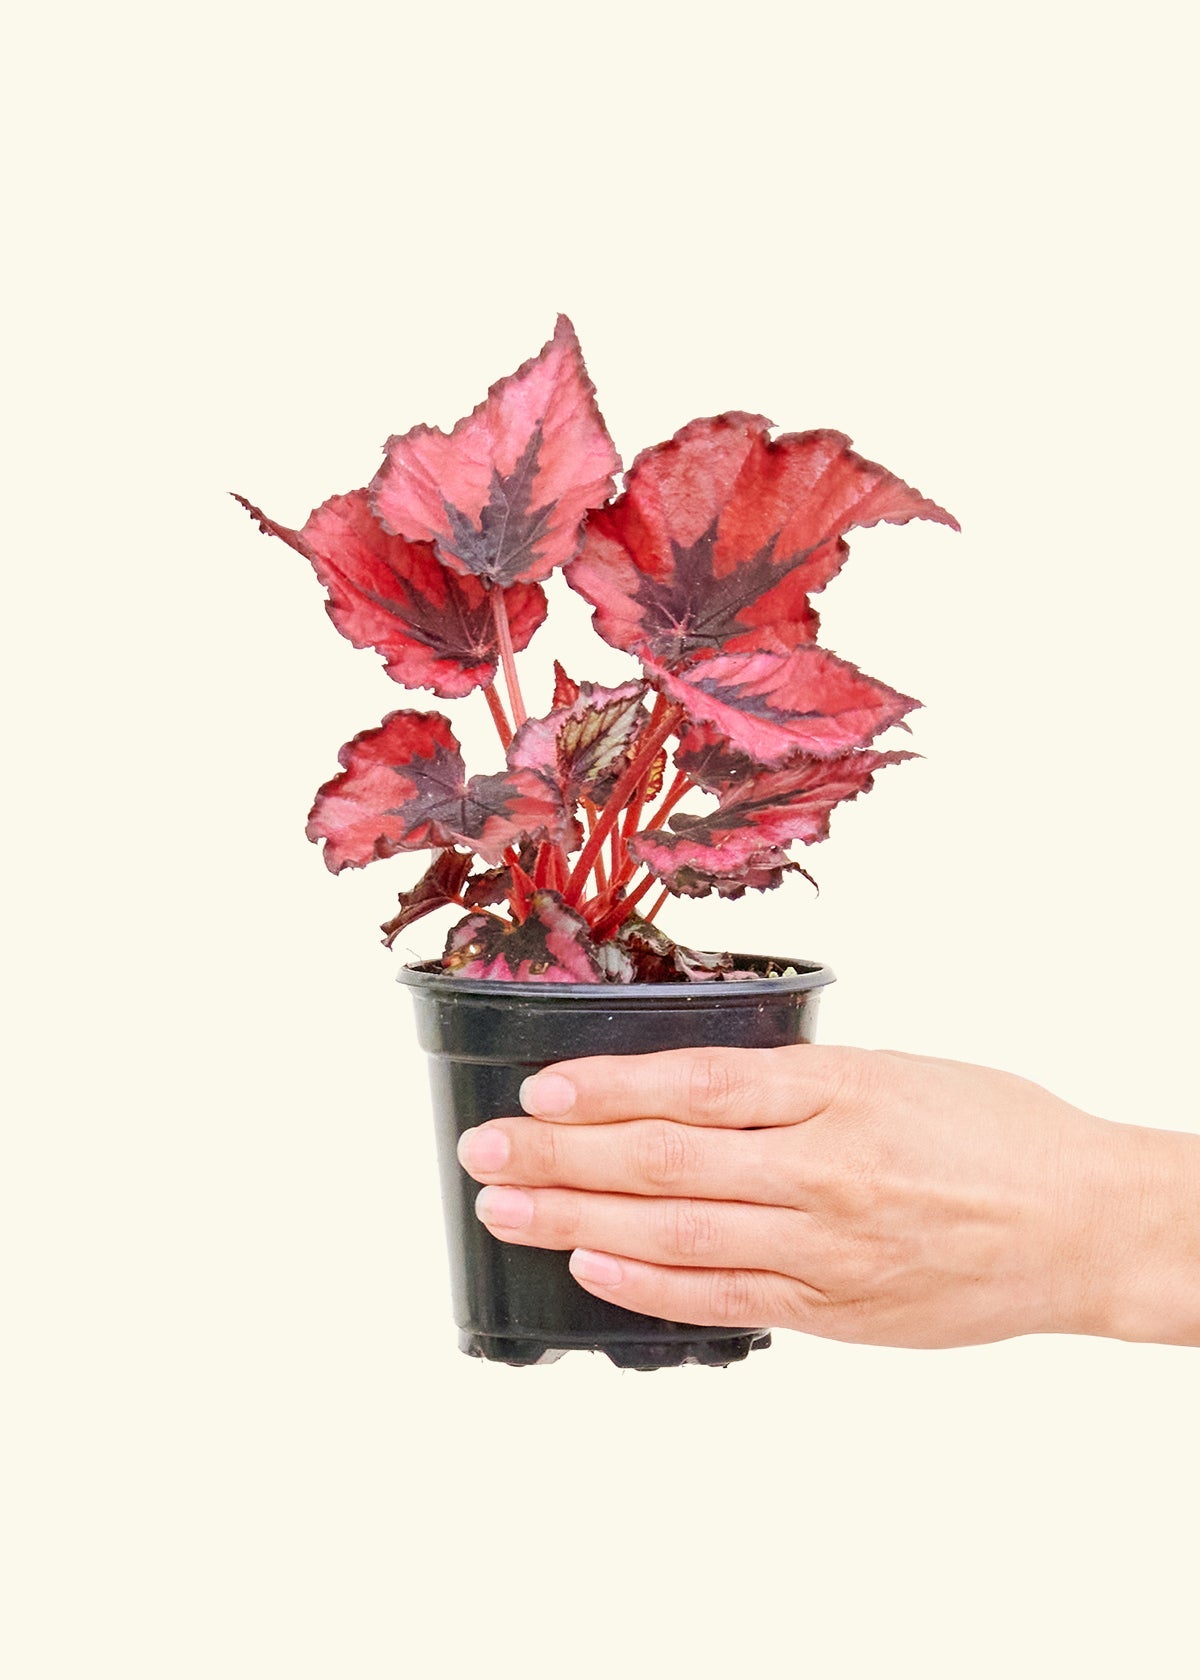 Small Begonia 'Red Robin' in a grow pot.